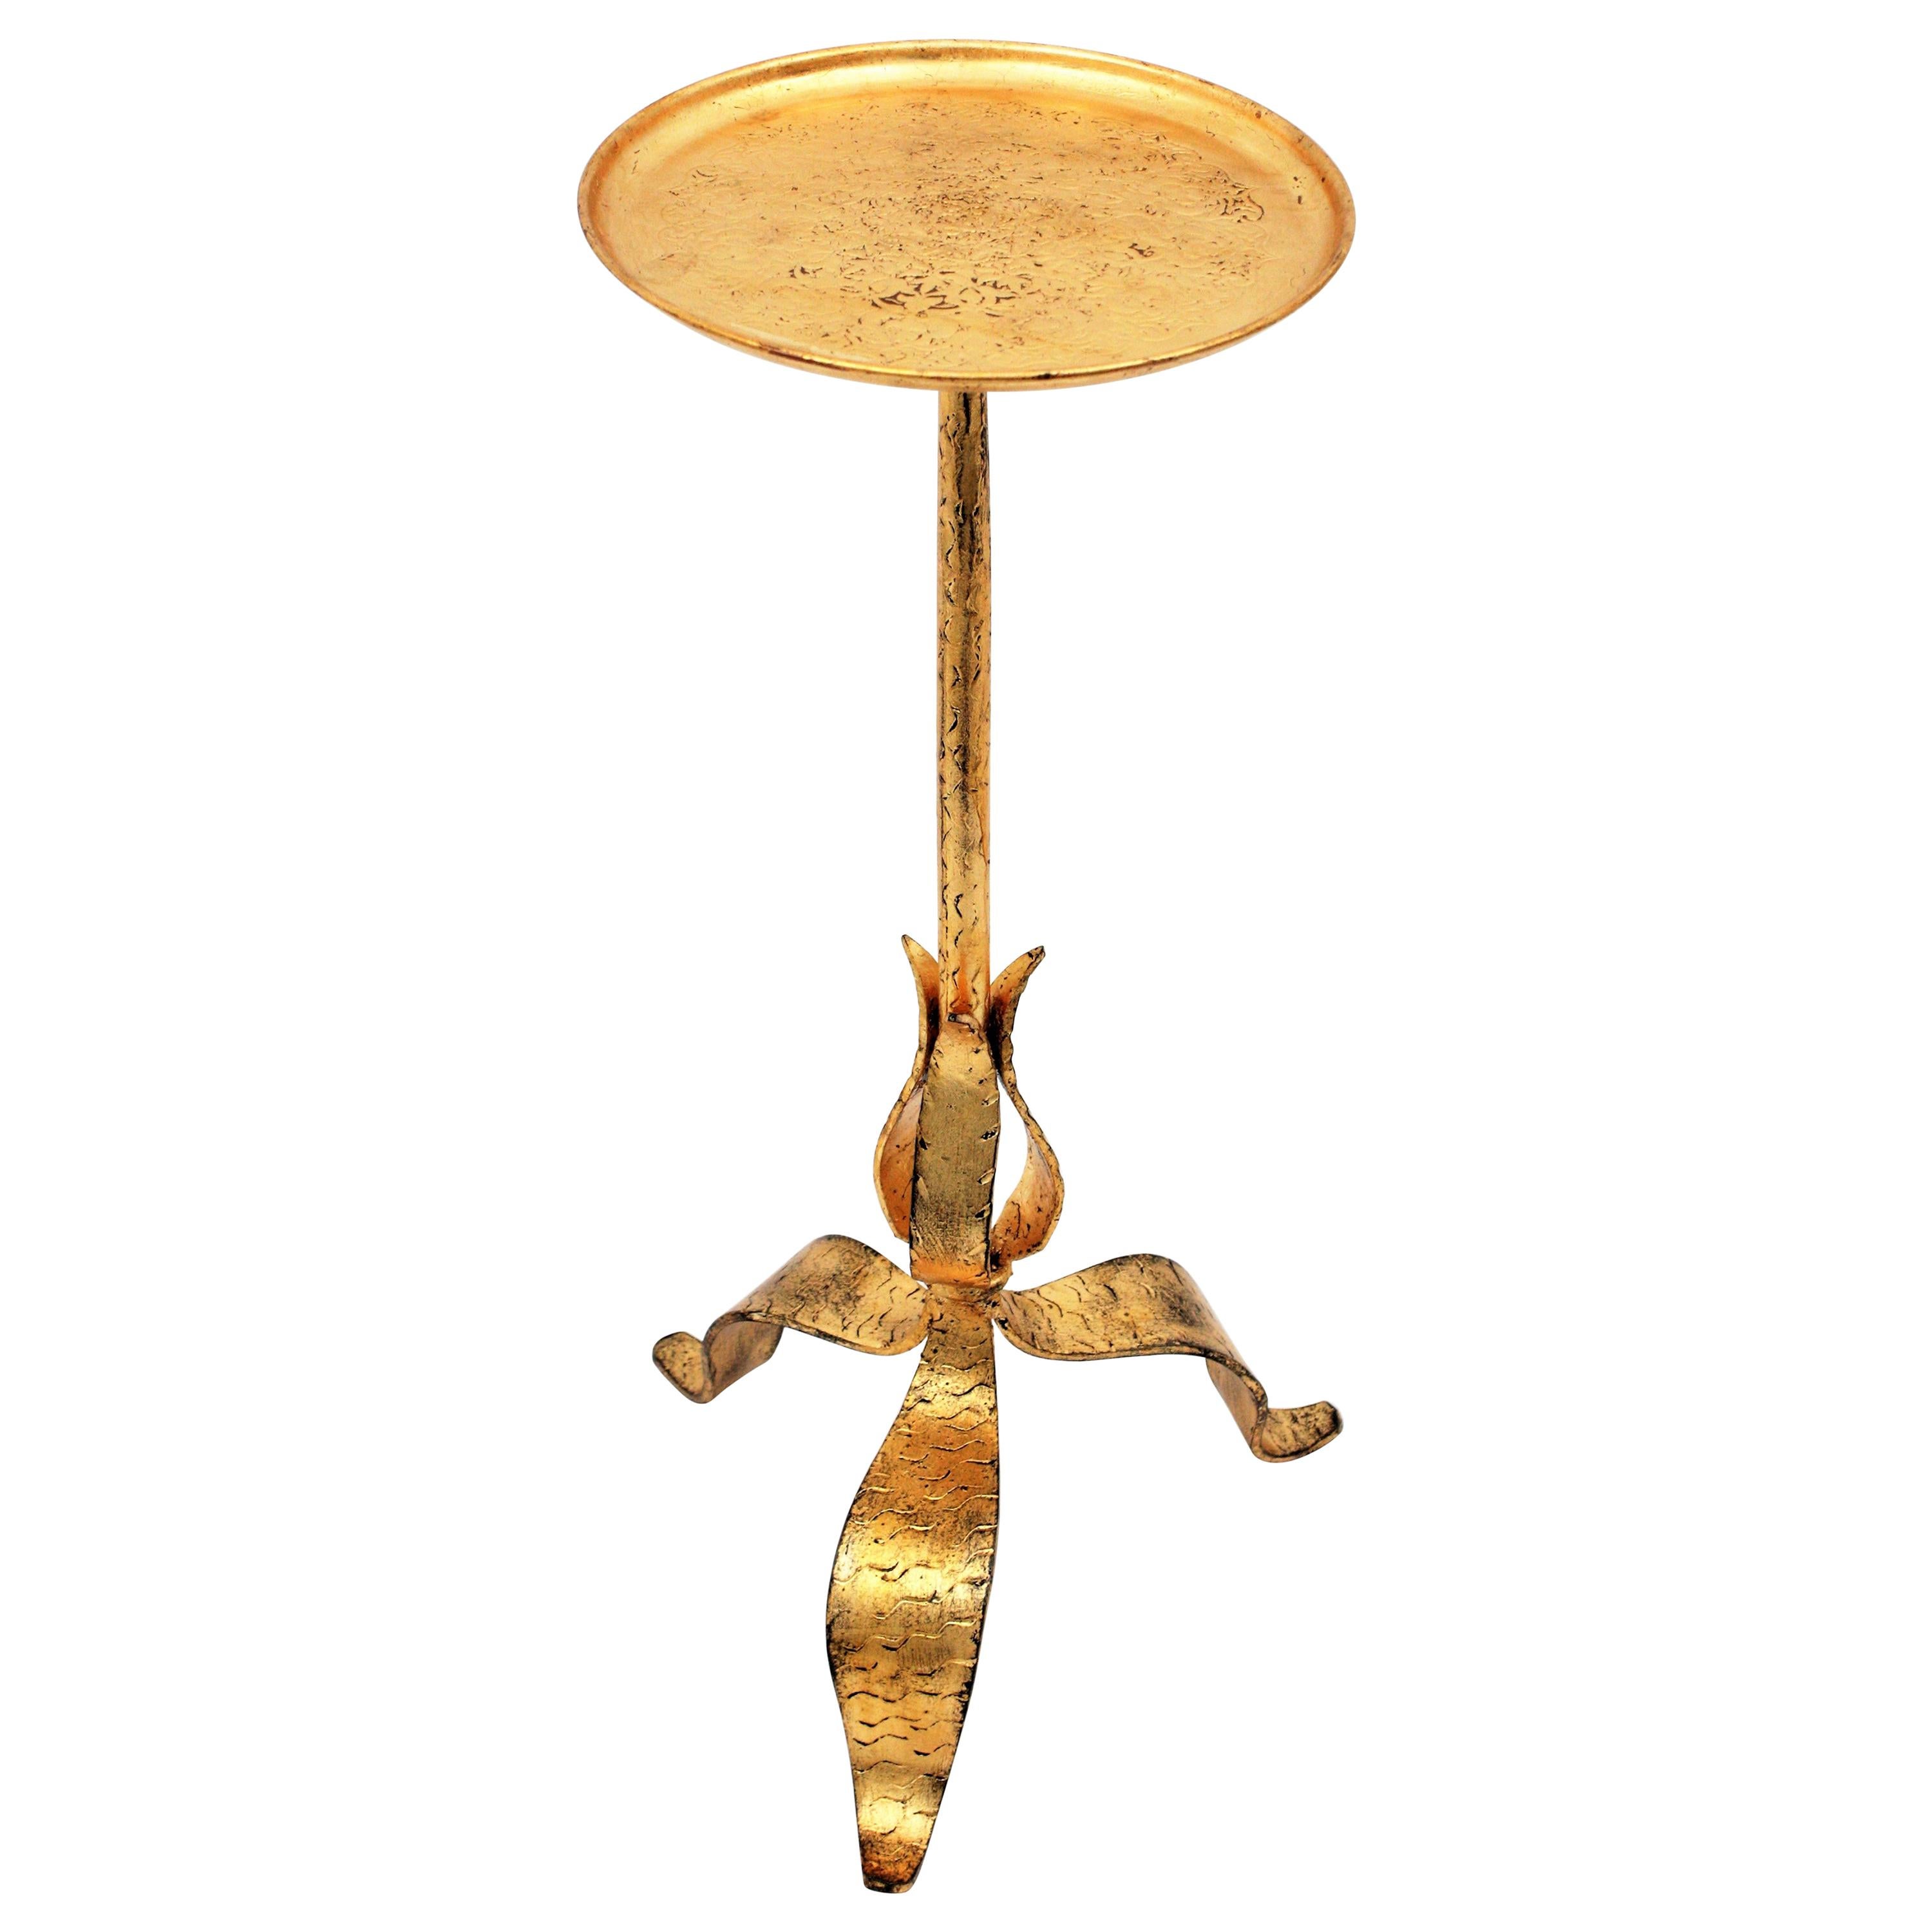 French 1930s Hand-Hammered Gilt Iron Gueridon Table or Stand with Leafed Base